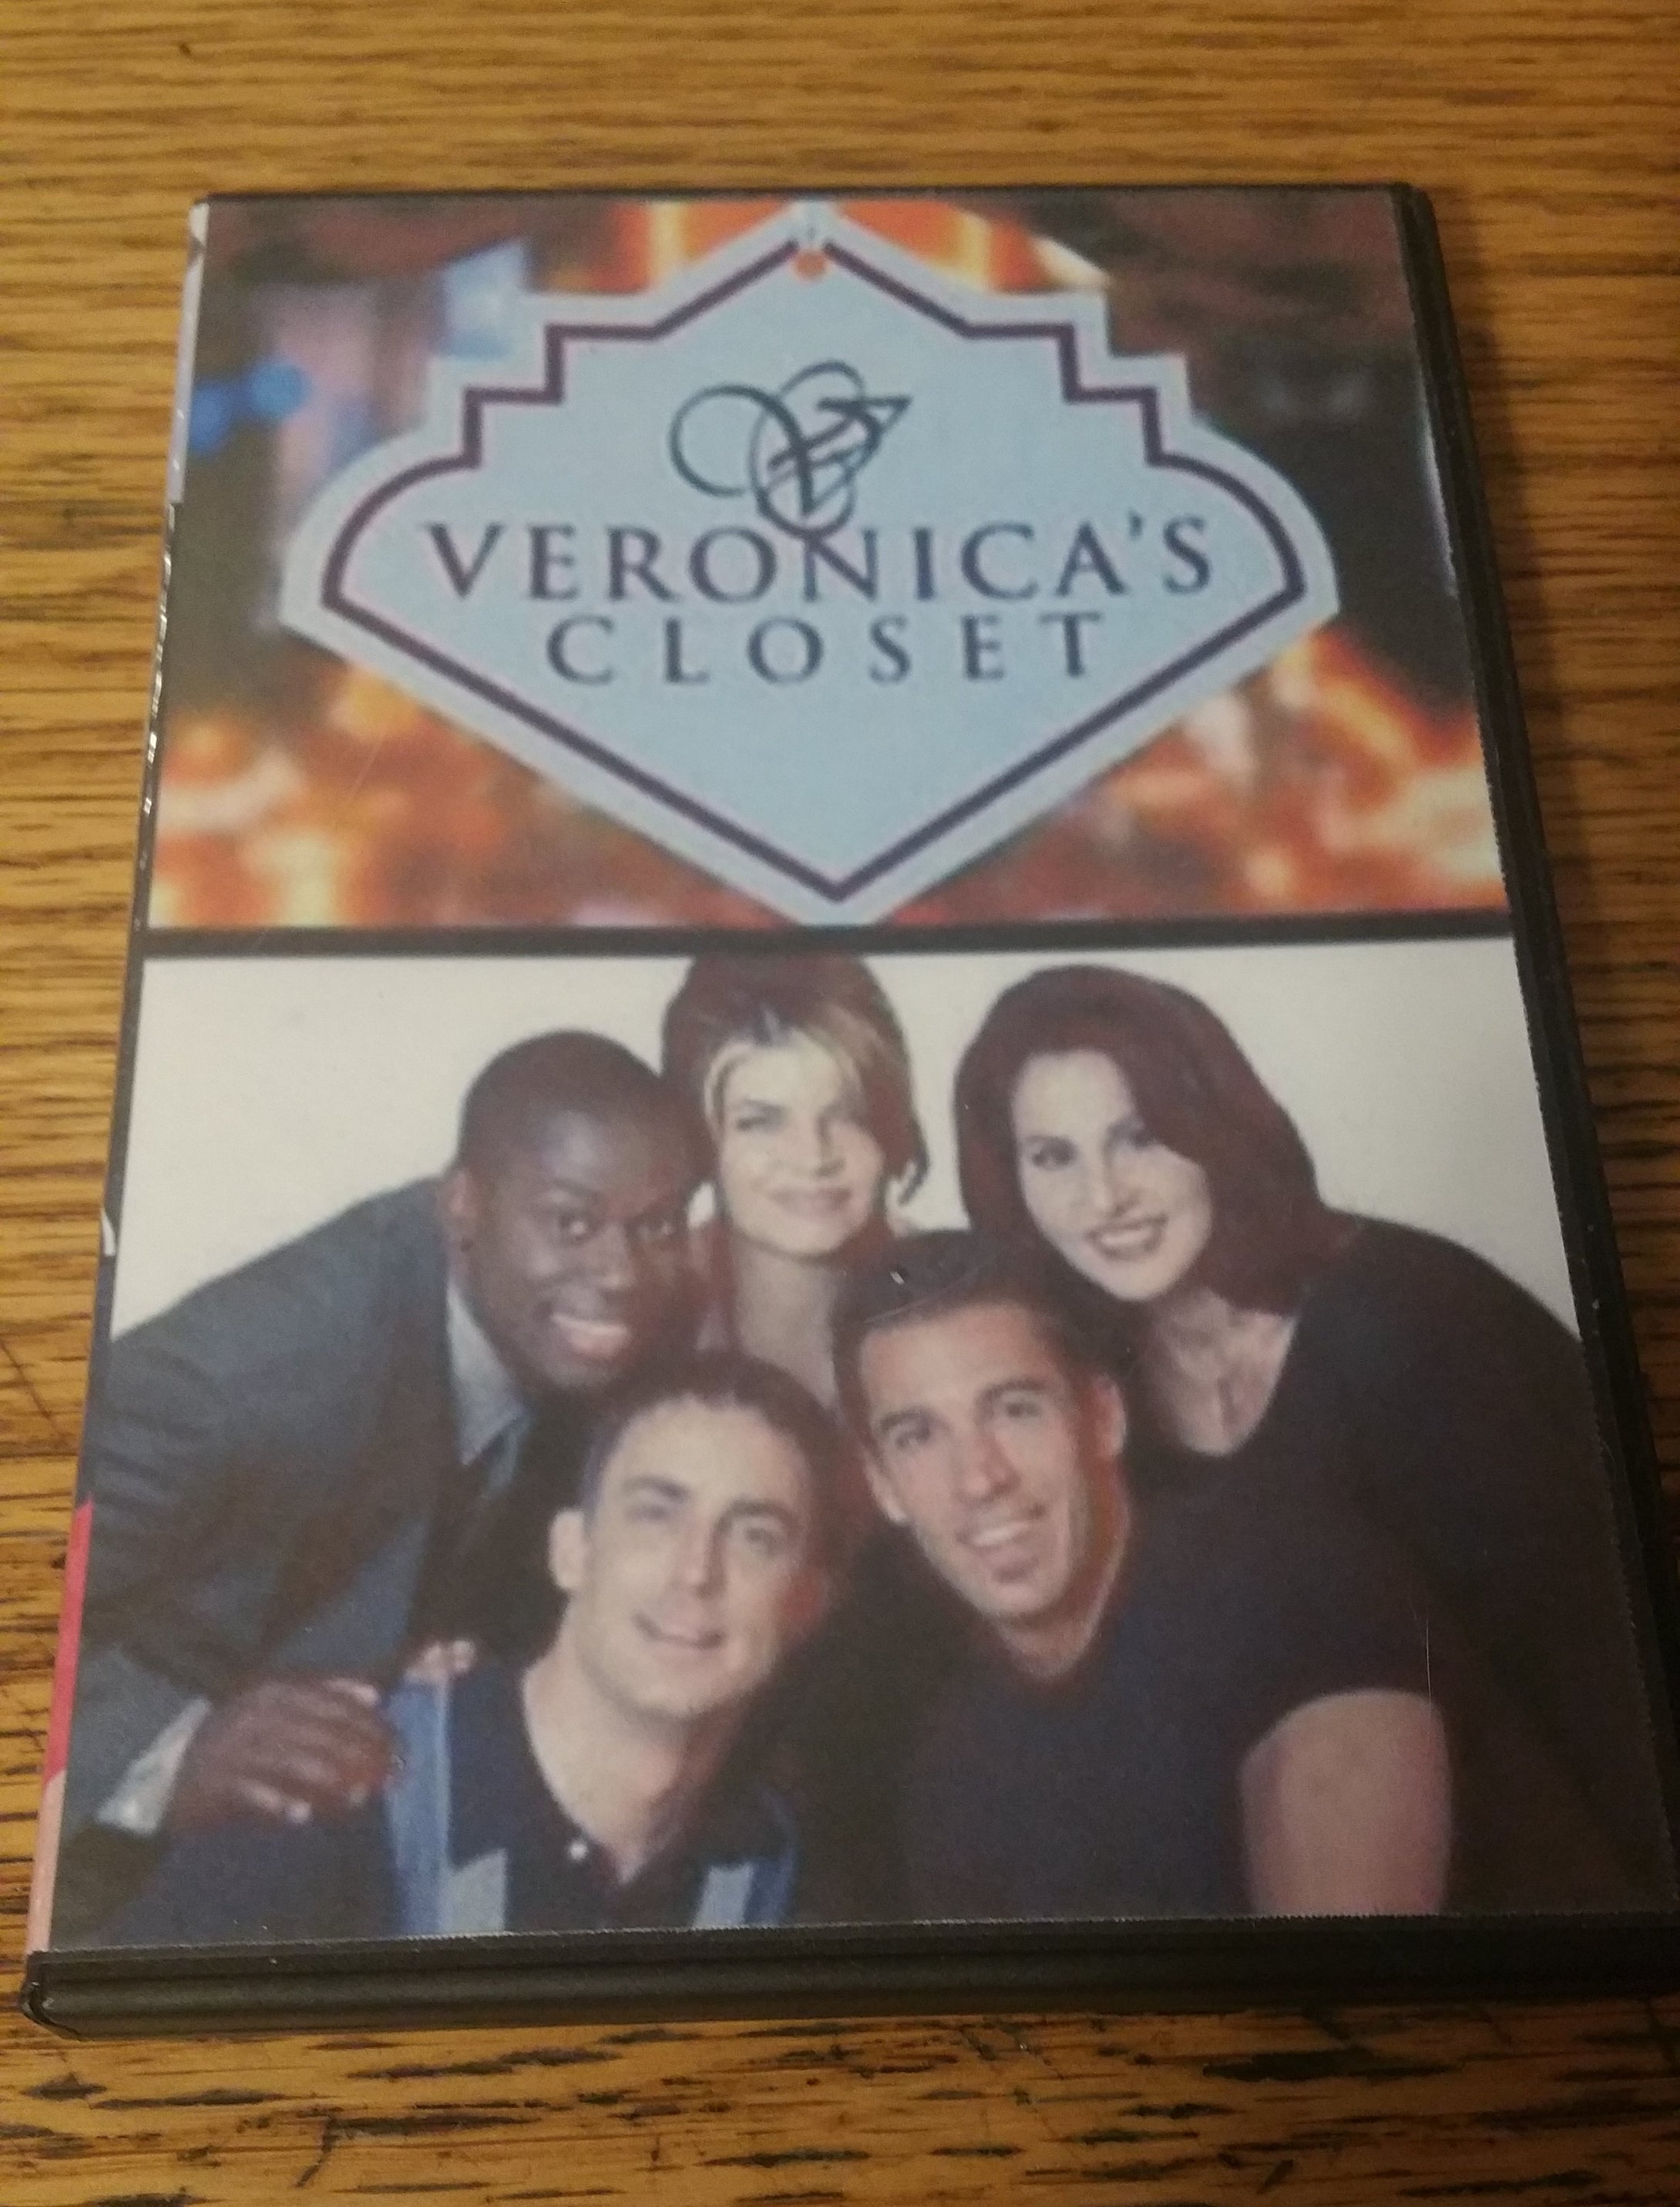 Veronica’s Closet 1997 The Complete Series On 6 DVD's Kirstie Alley Wallace Langham Kathy Najimy